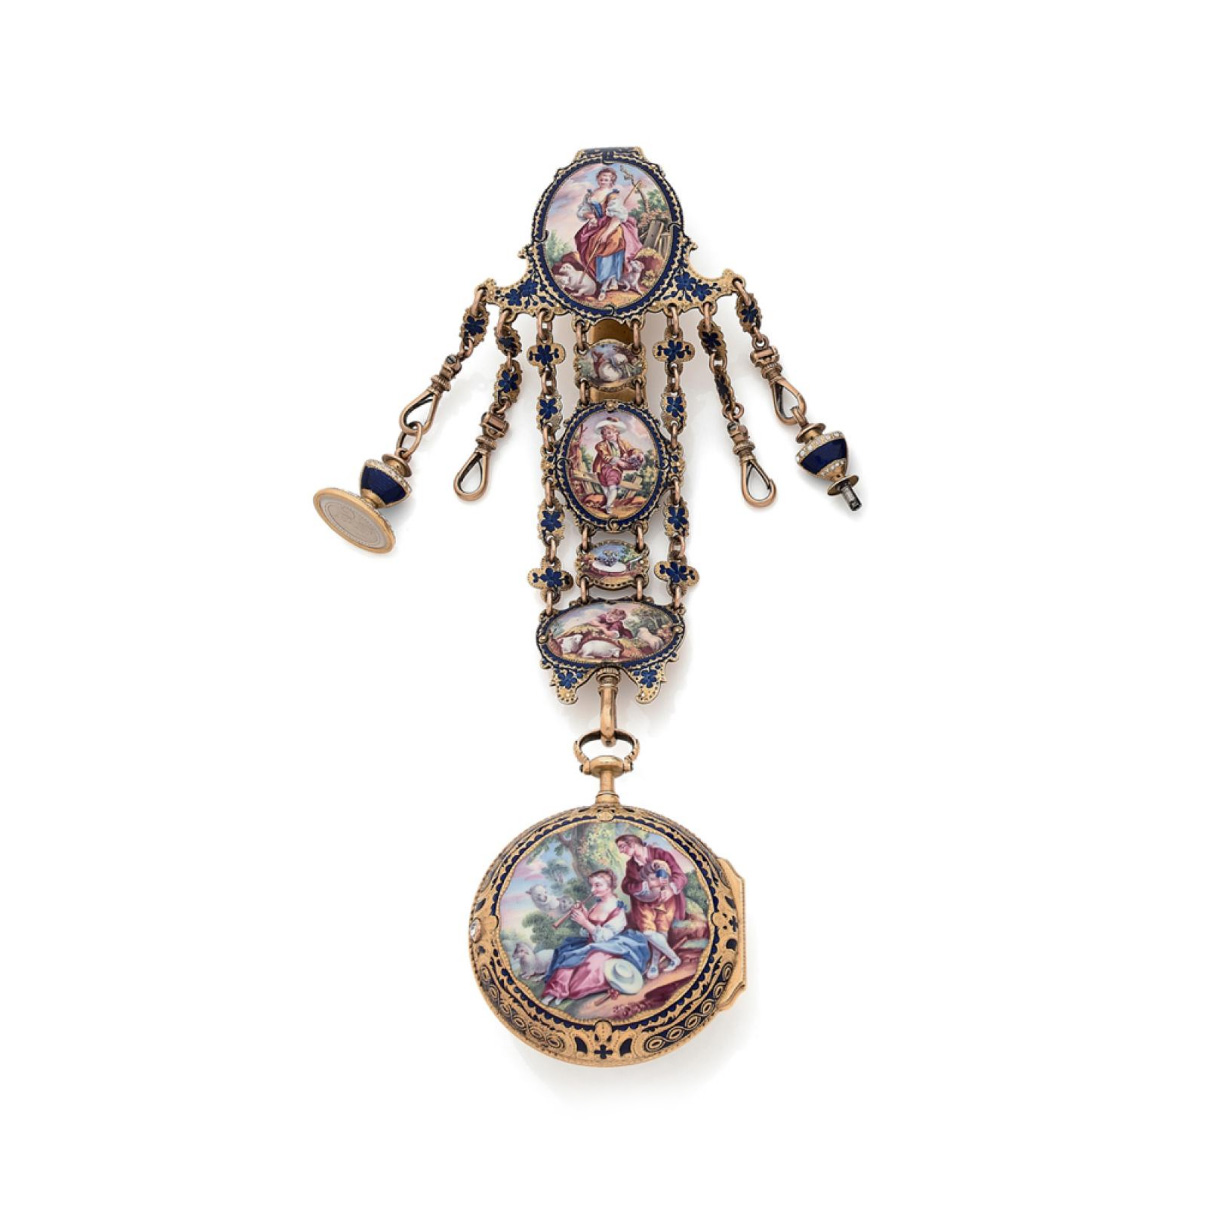 €5,824Allam, London, late 18th century, watch and chatelaine in enameled gold decorated with country scenes, gross weight 108.6 g (3.83 oz